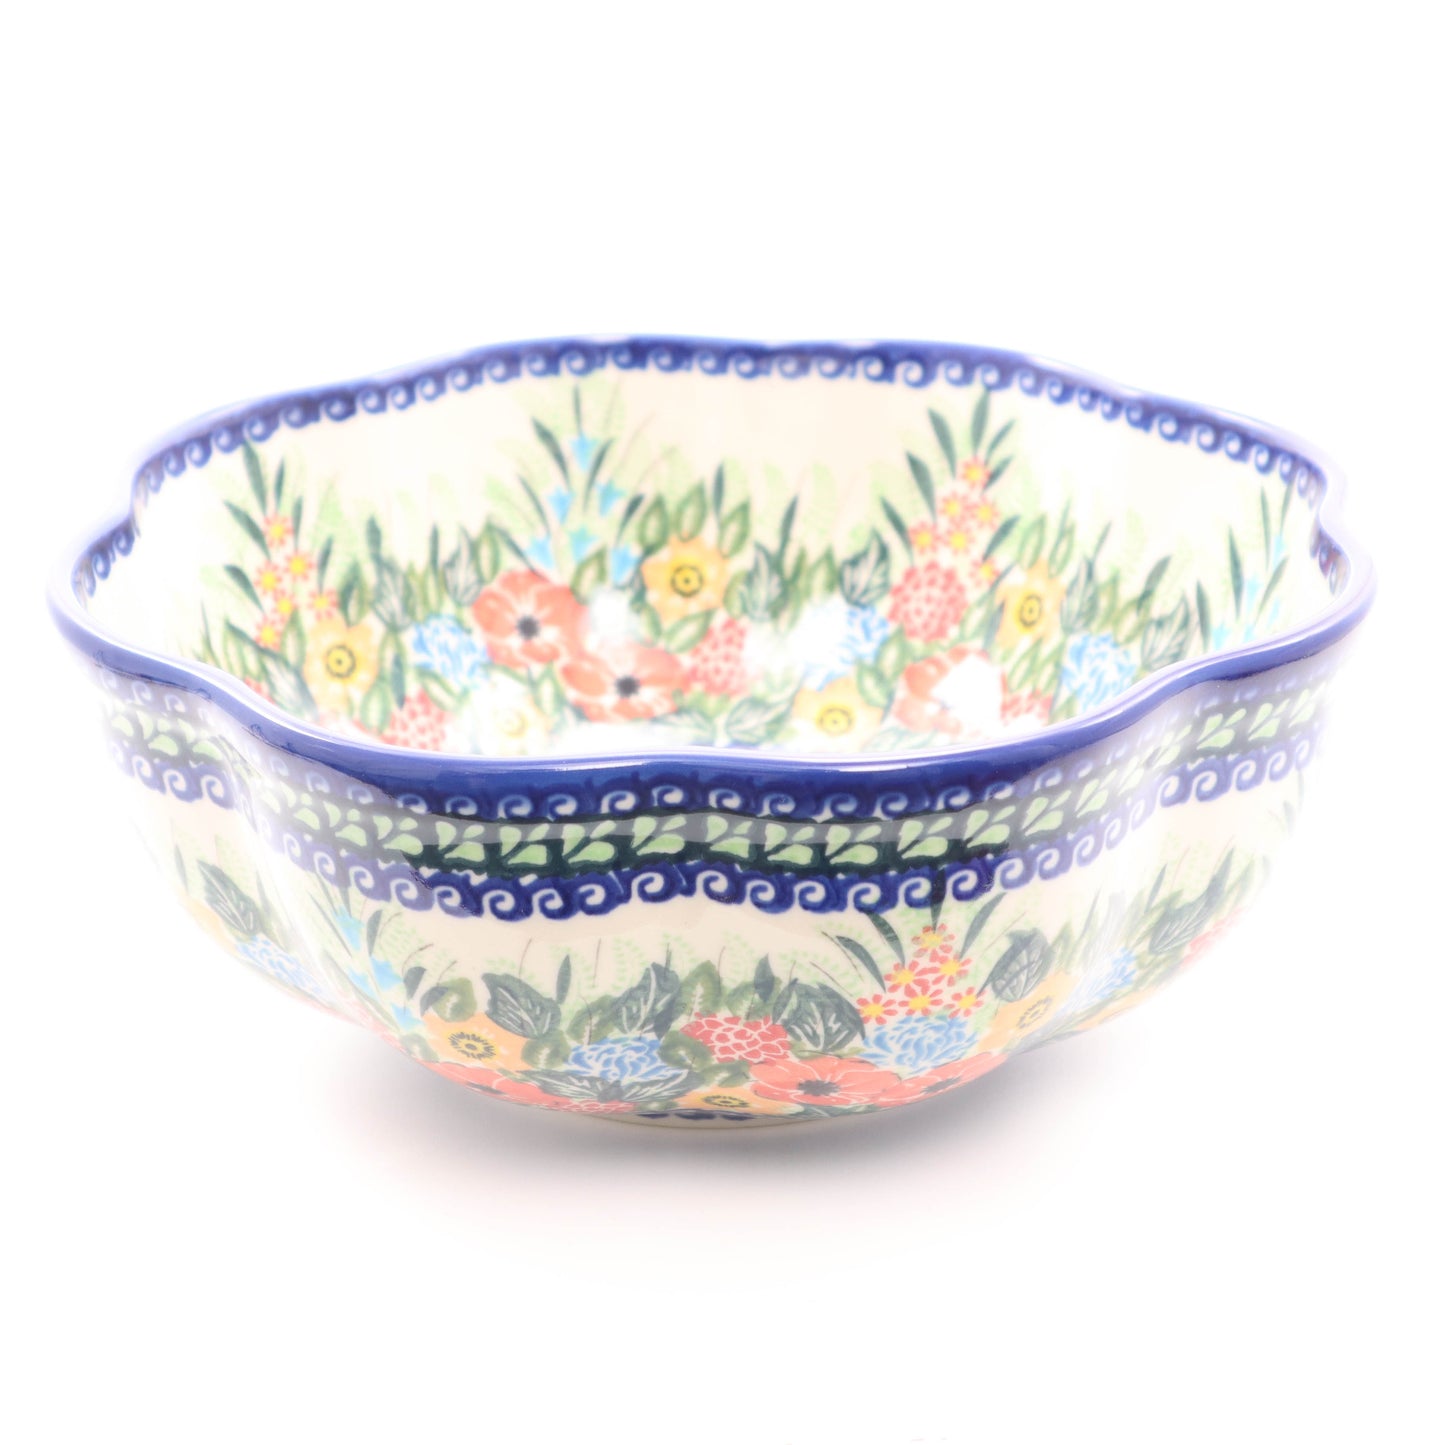 10"x4" Large Waved Bowl. Pattern: Summer's Folly